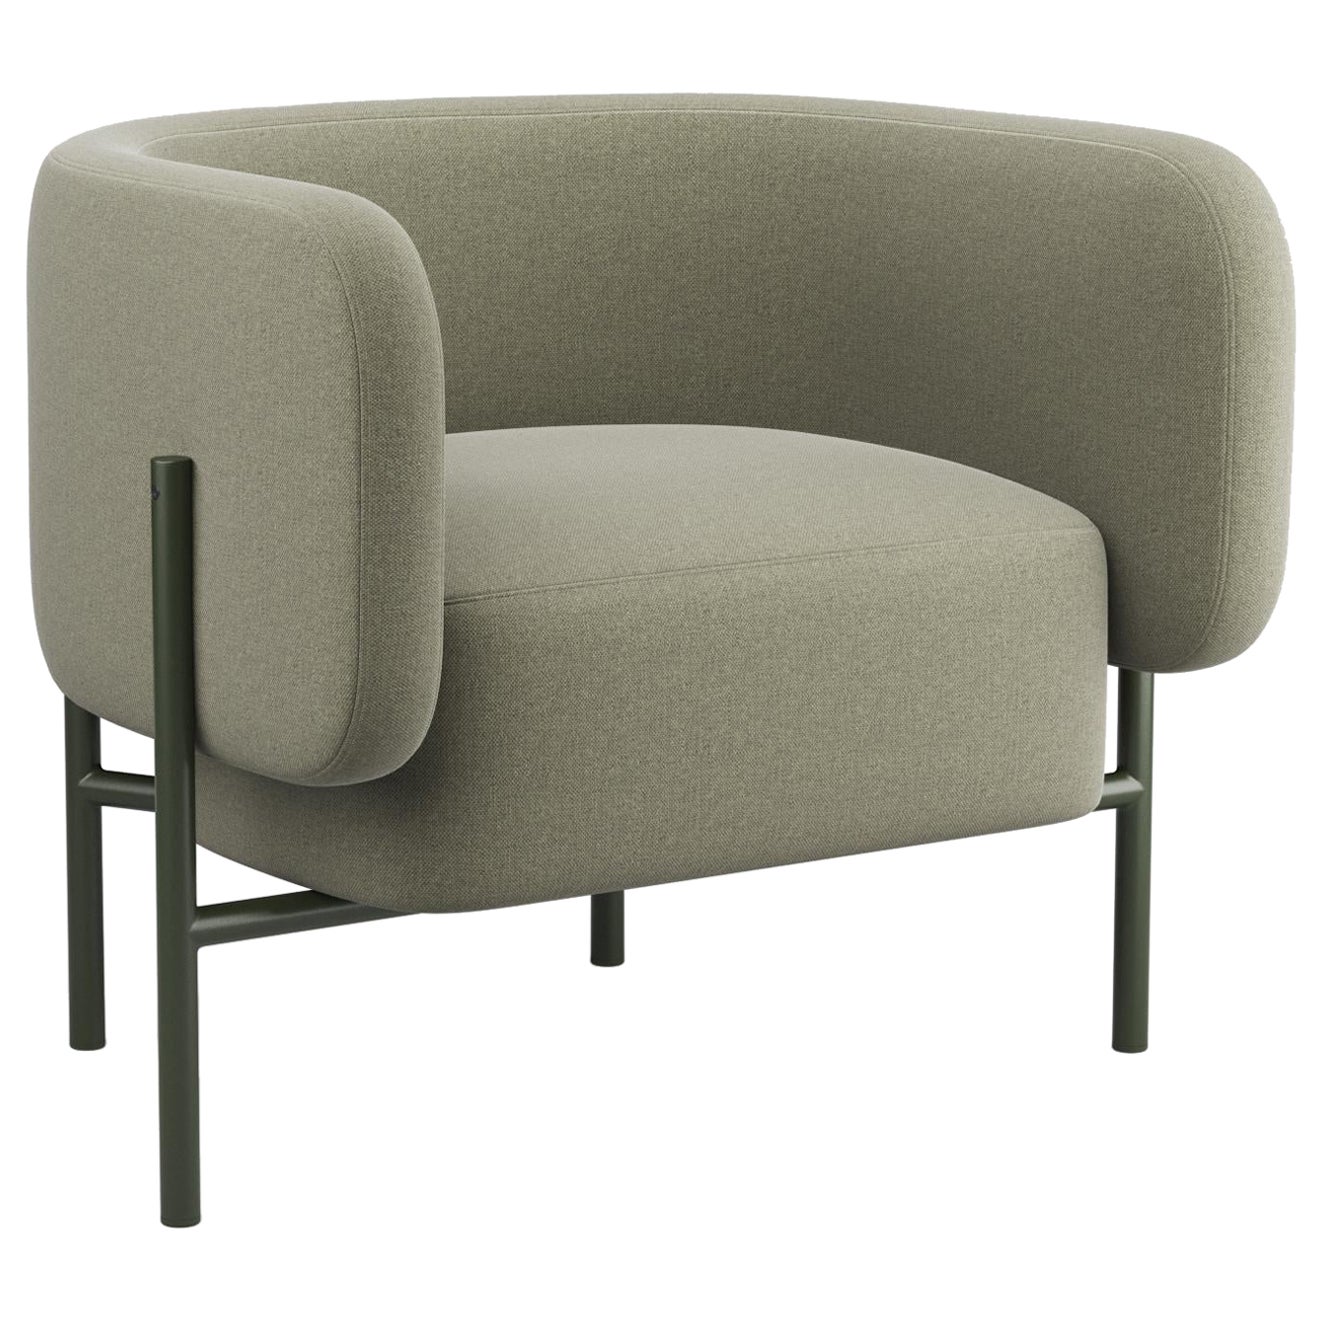 Hayche Abrazo Armchair - Green, UK, Made to Order For Sale